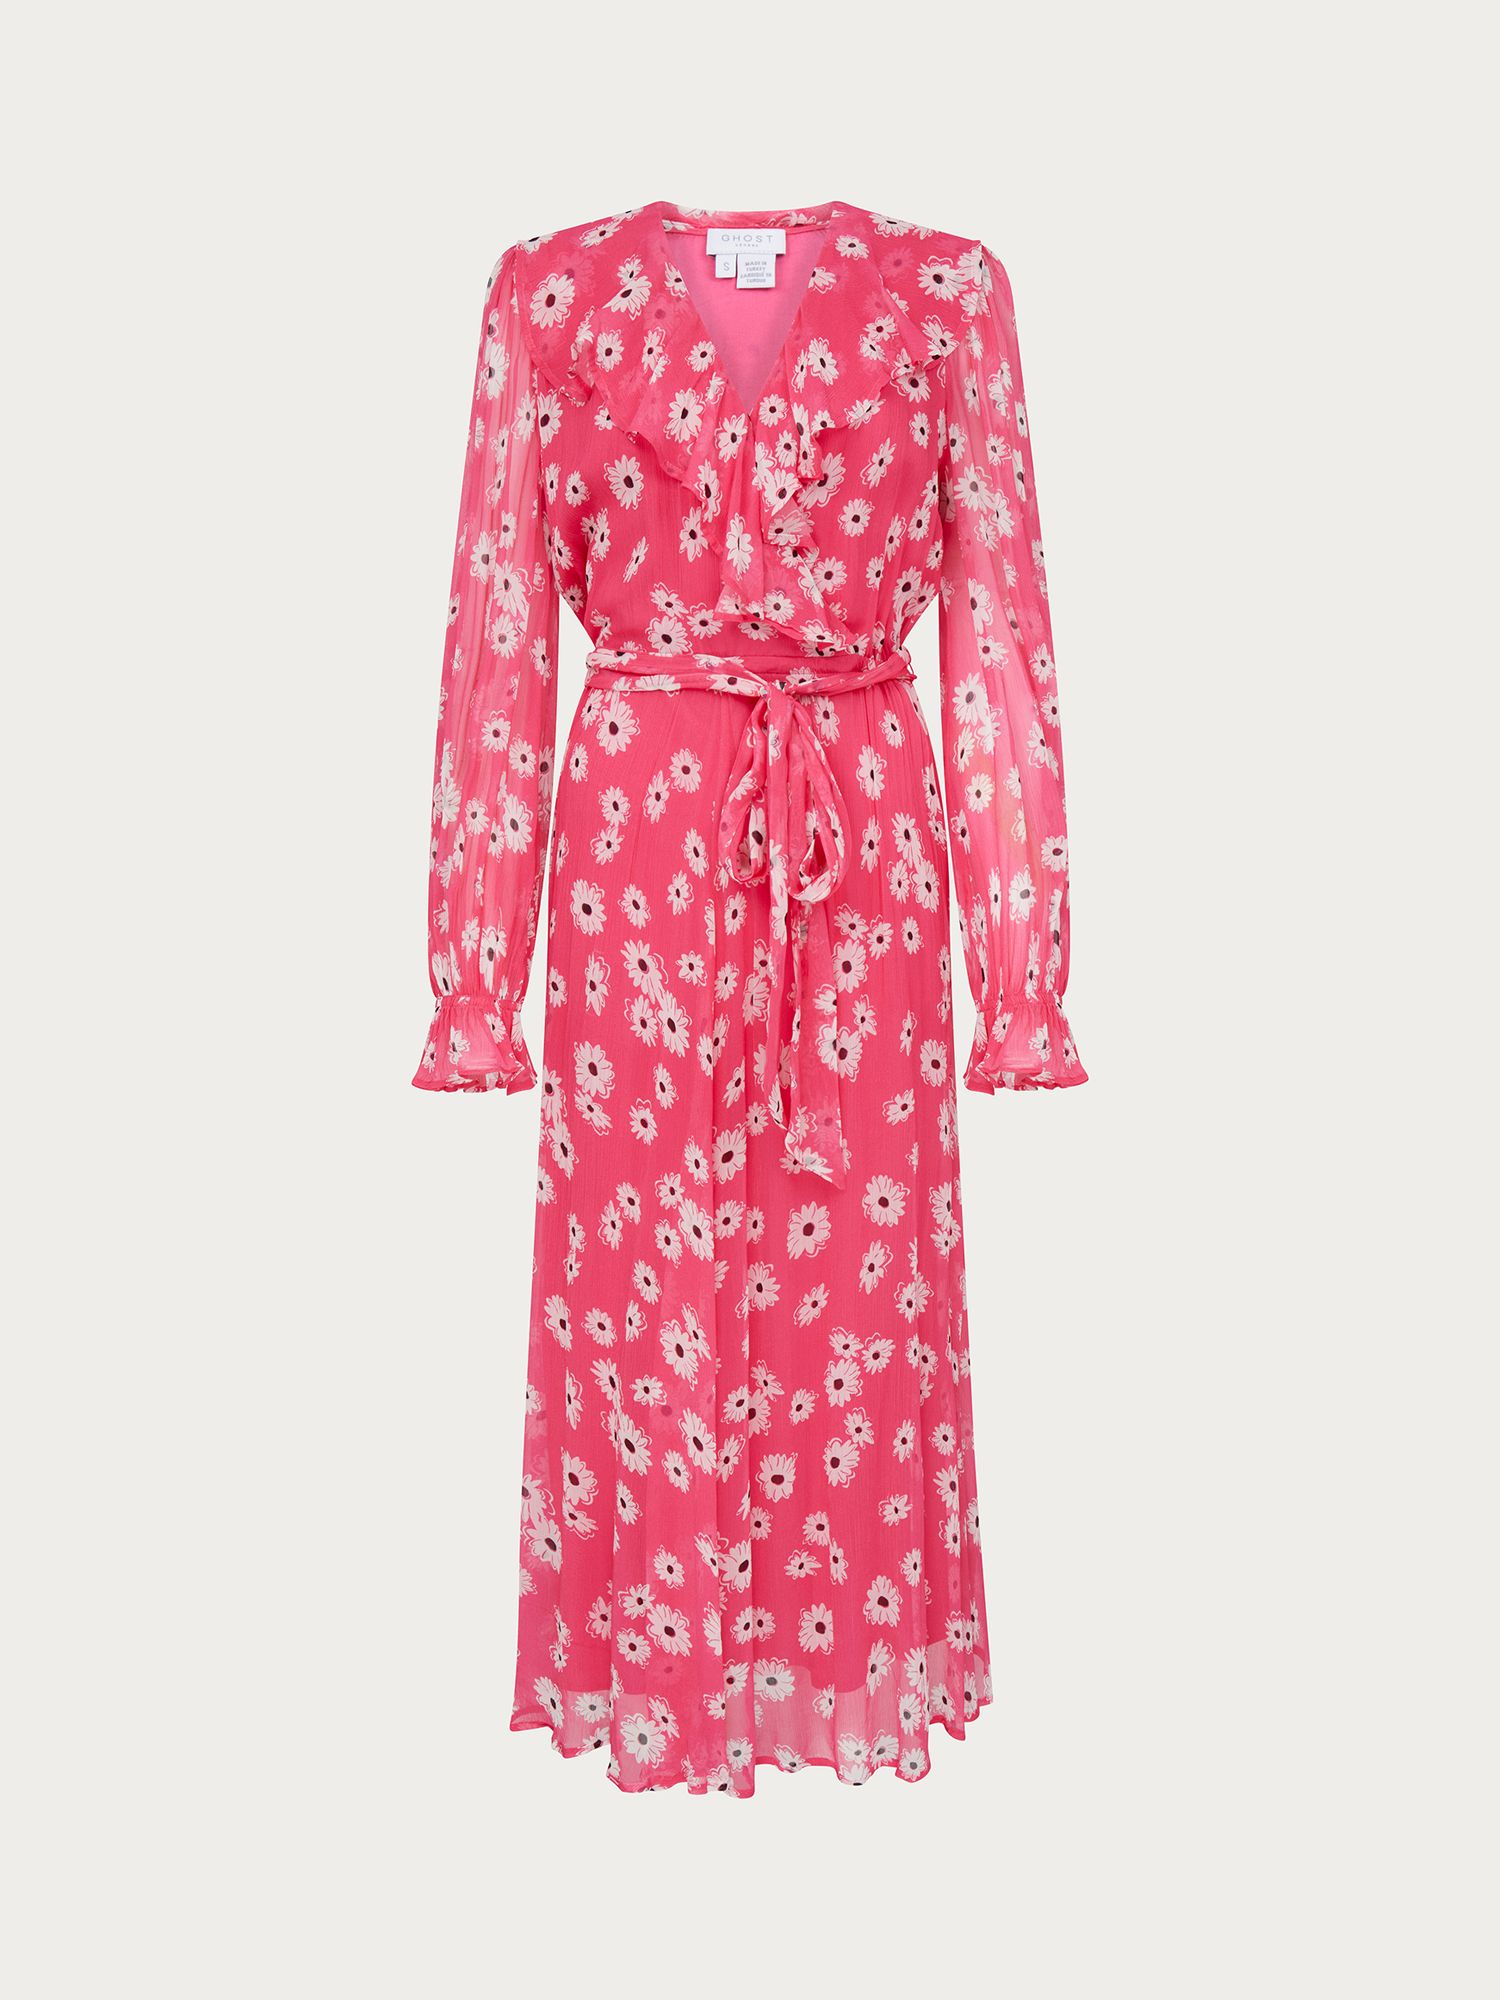 Ghost Su Floral Wrap Dress, Pink Daisy at John Lewis & Partners